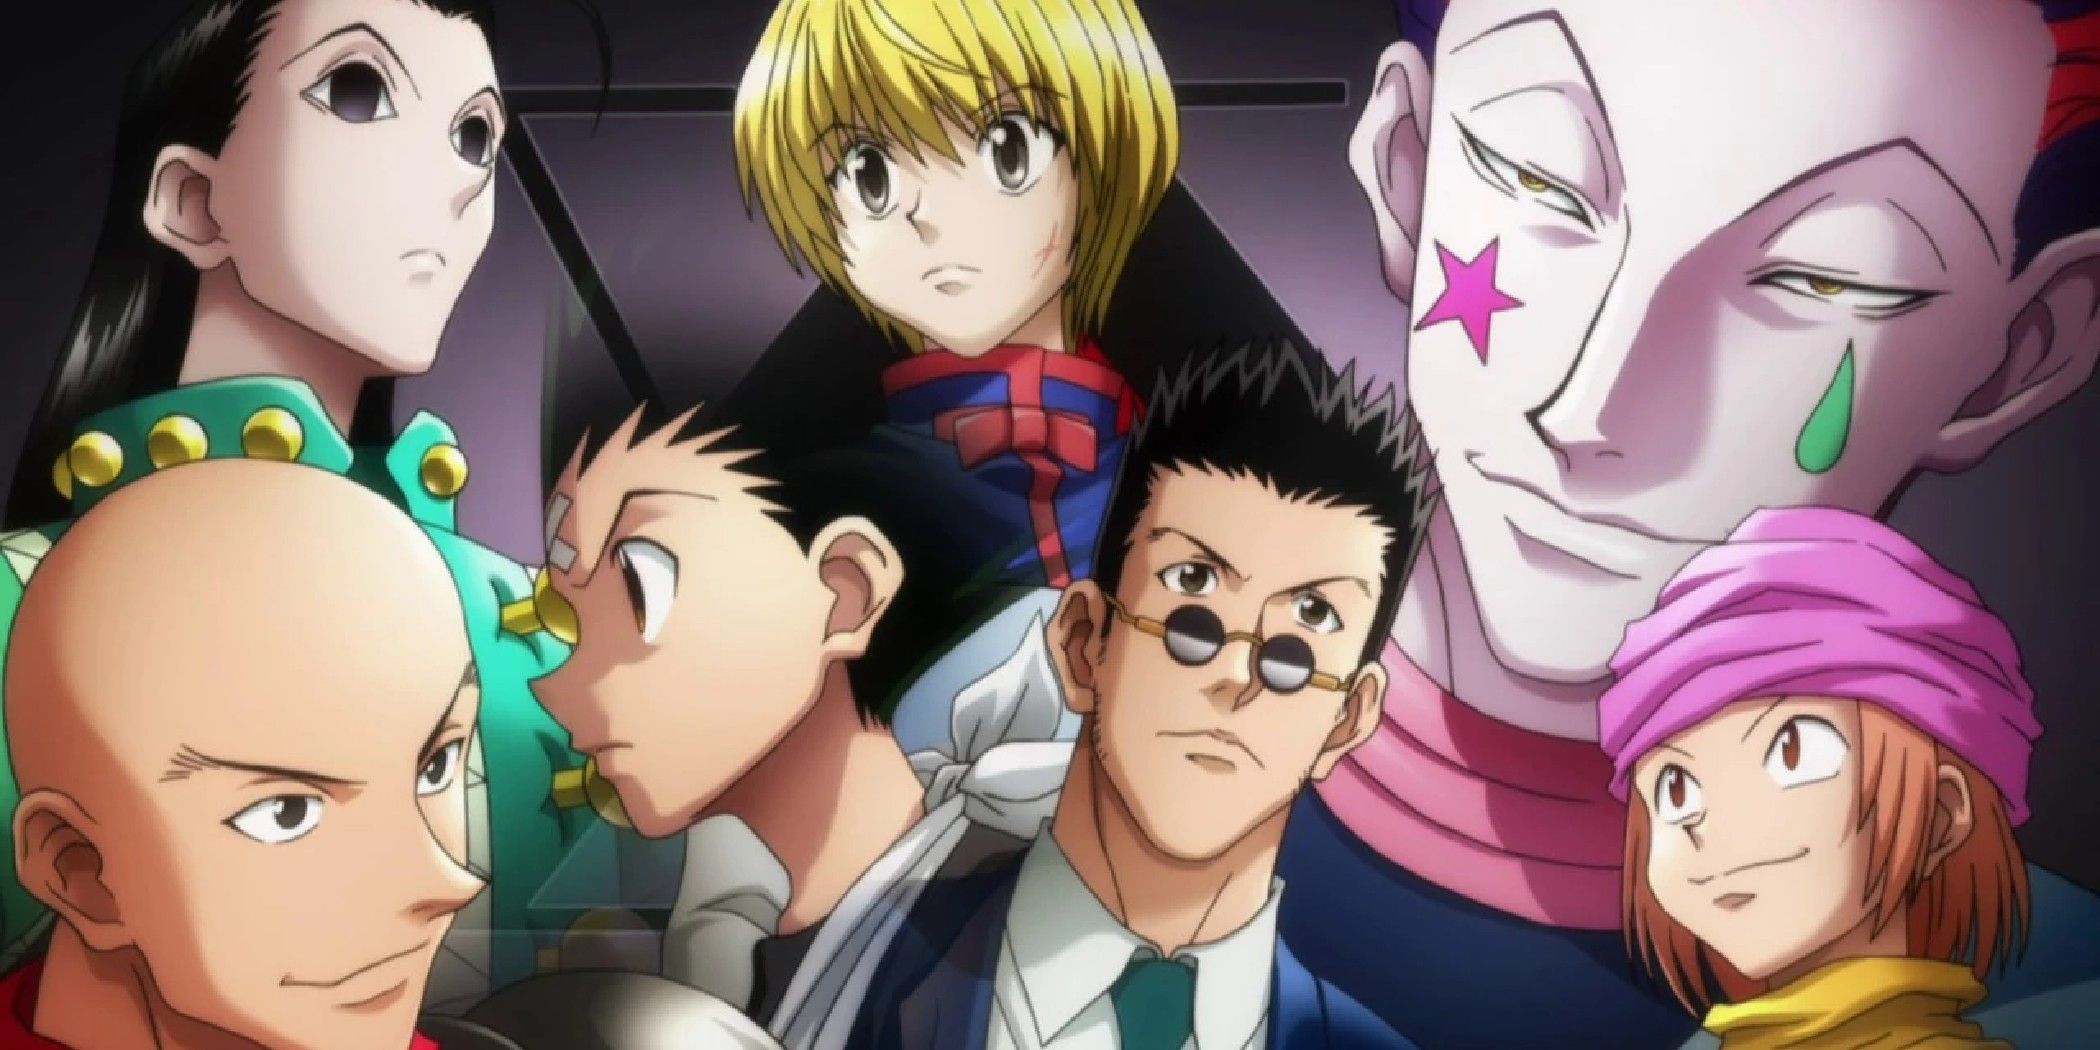 The story of Hunter x Hunter will be completely different